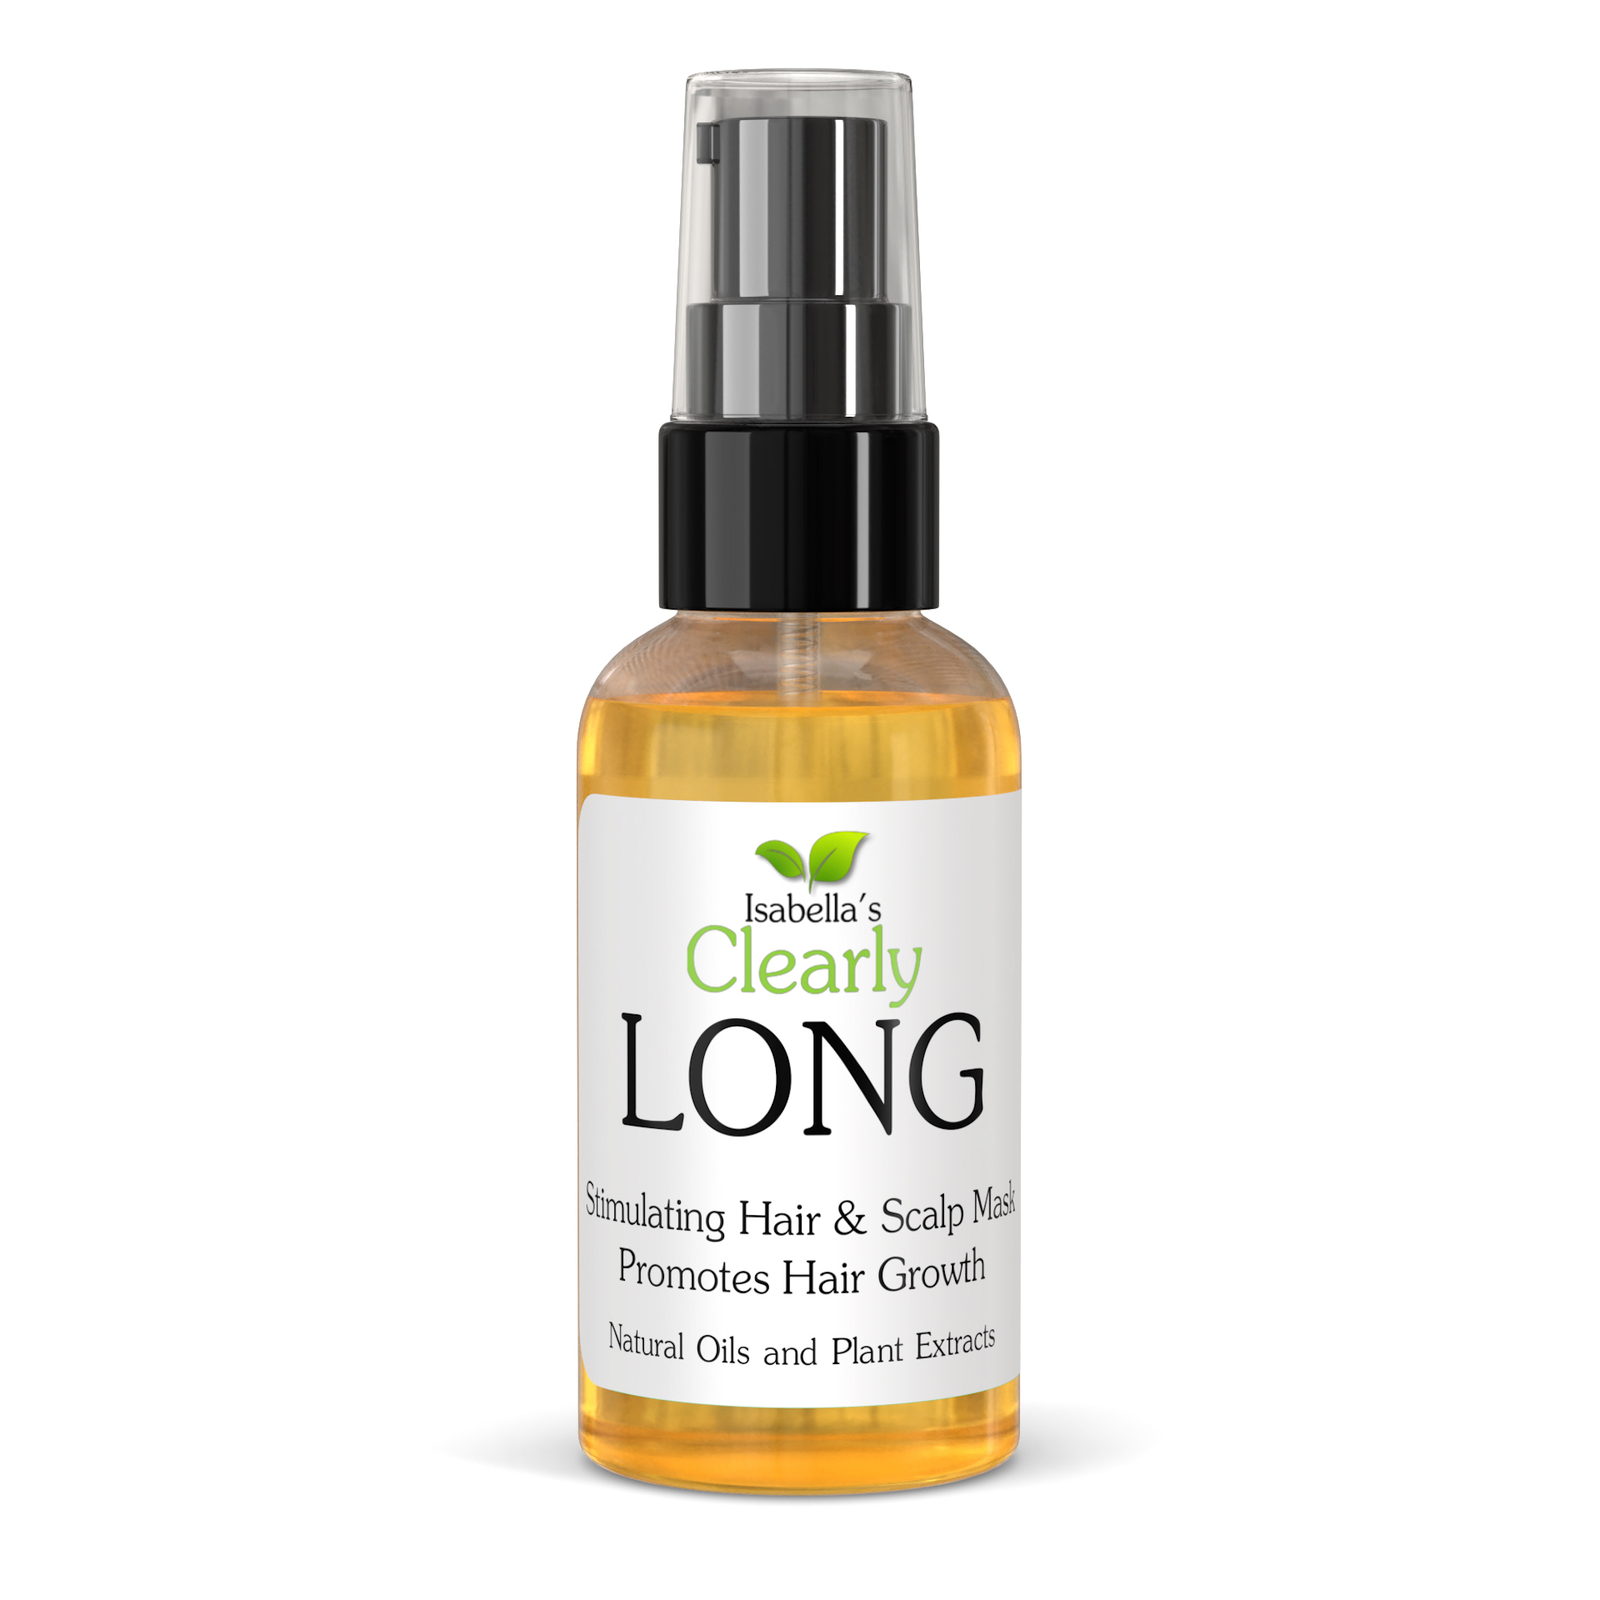 Clearly LONG, Leave In Hair Strengthening Oil Treatment